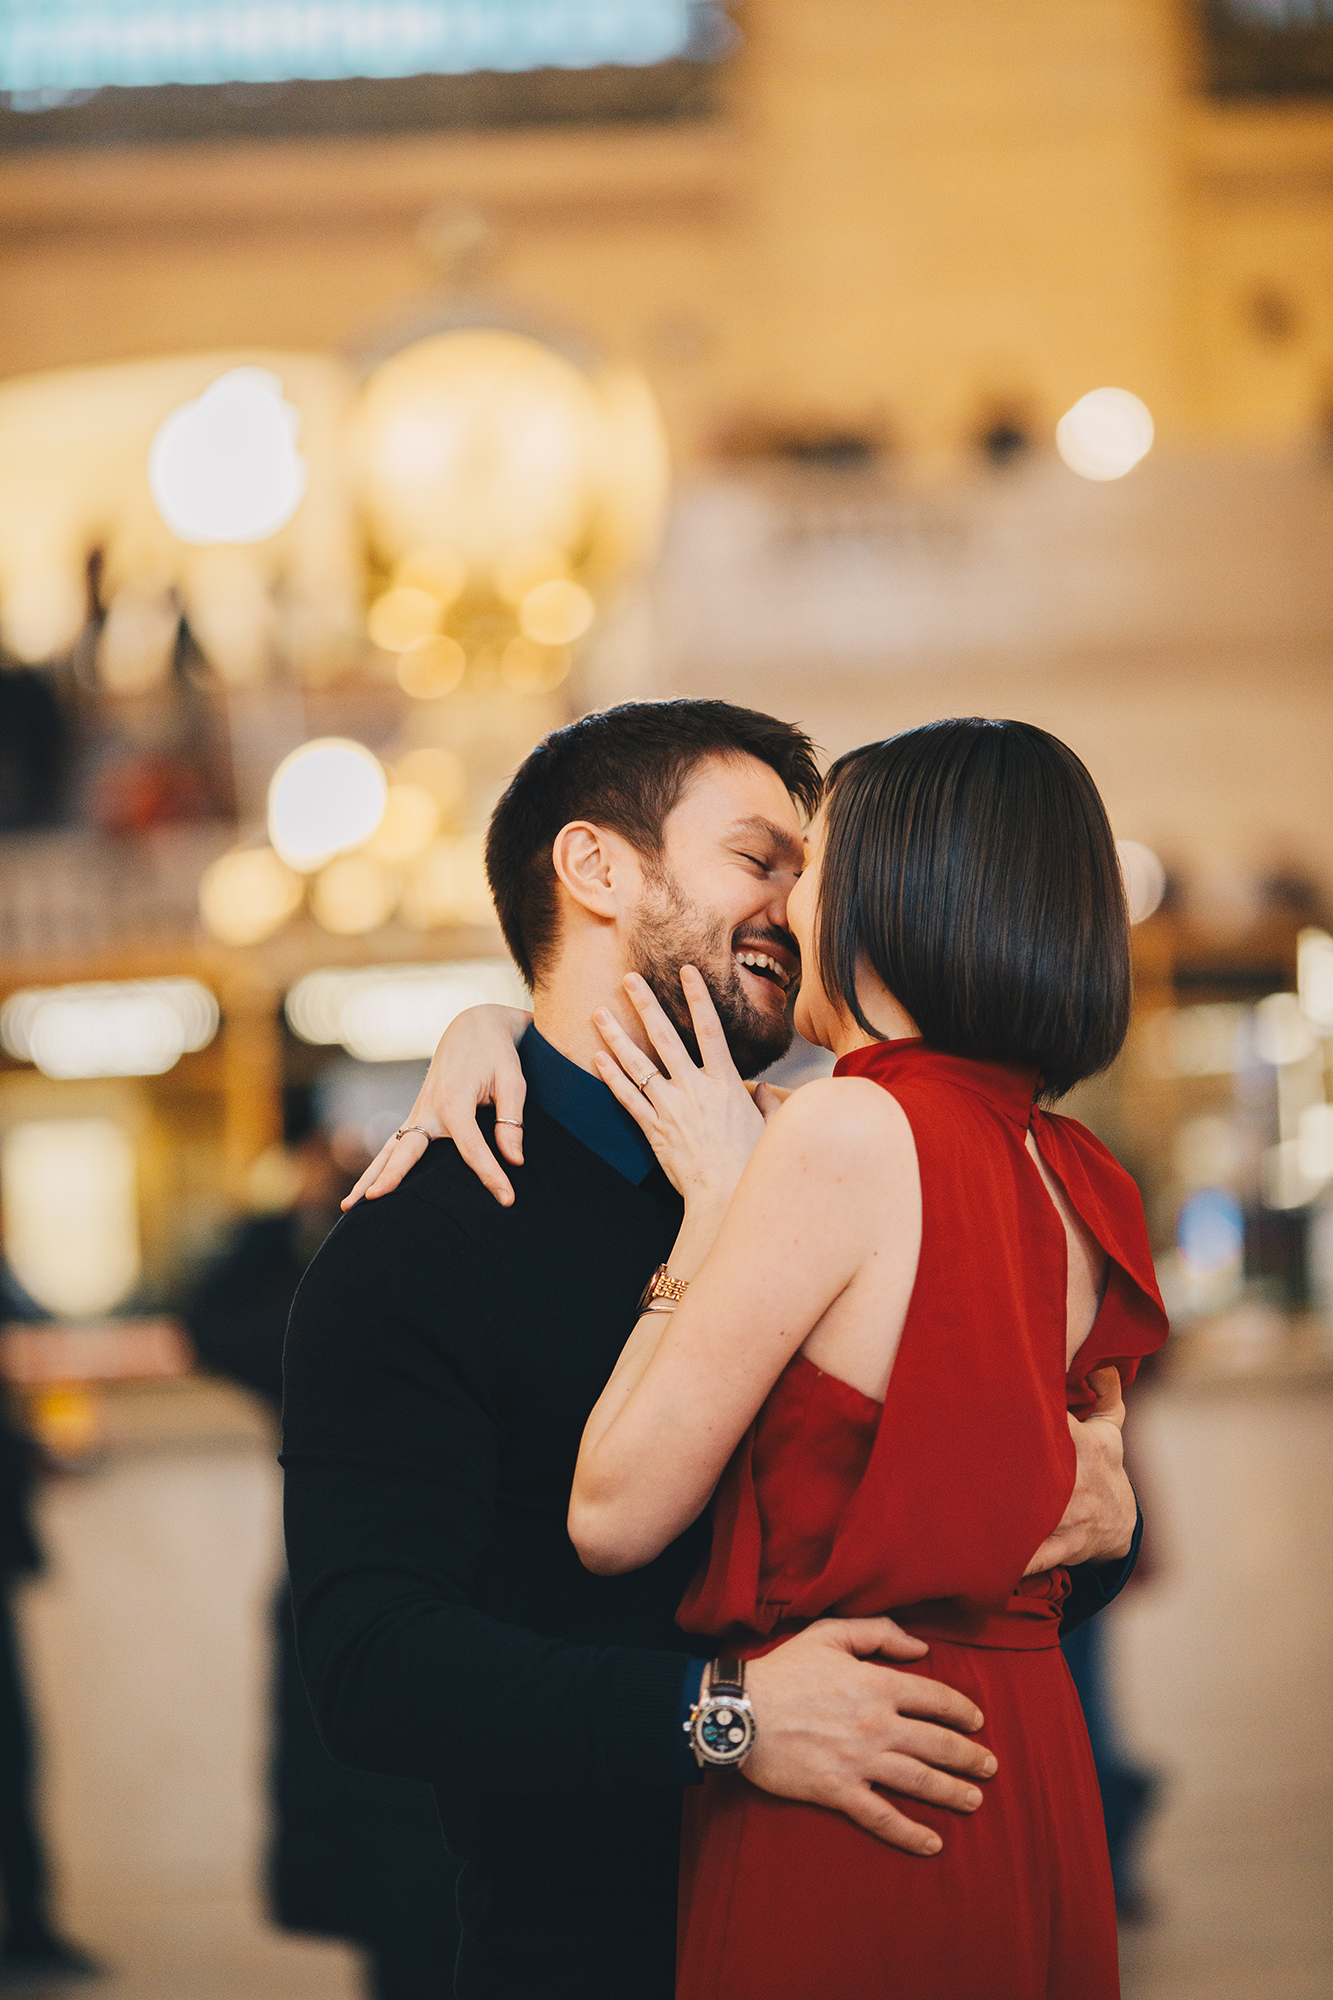 Stunning Times Square Engagement Photos and Grand Central Engagement Photography in NYC